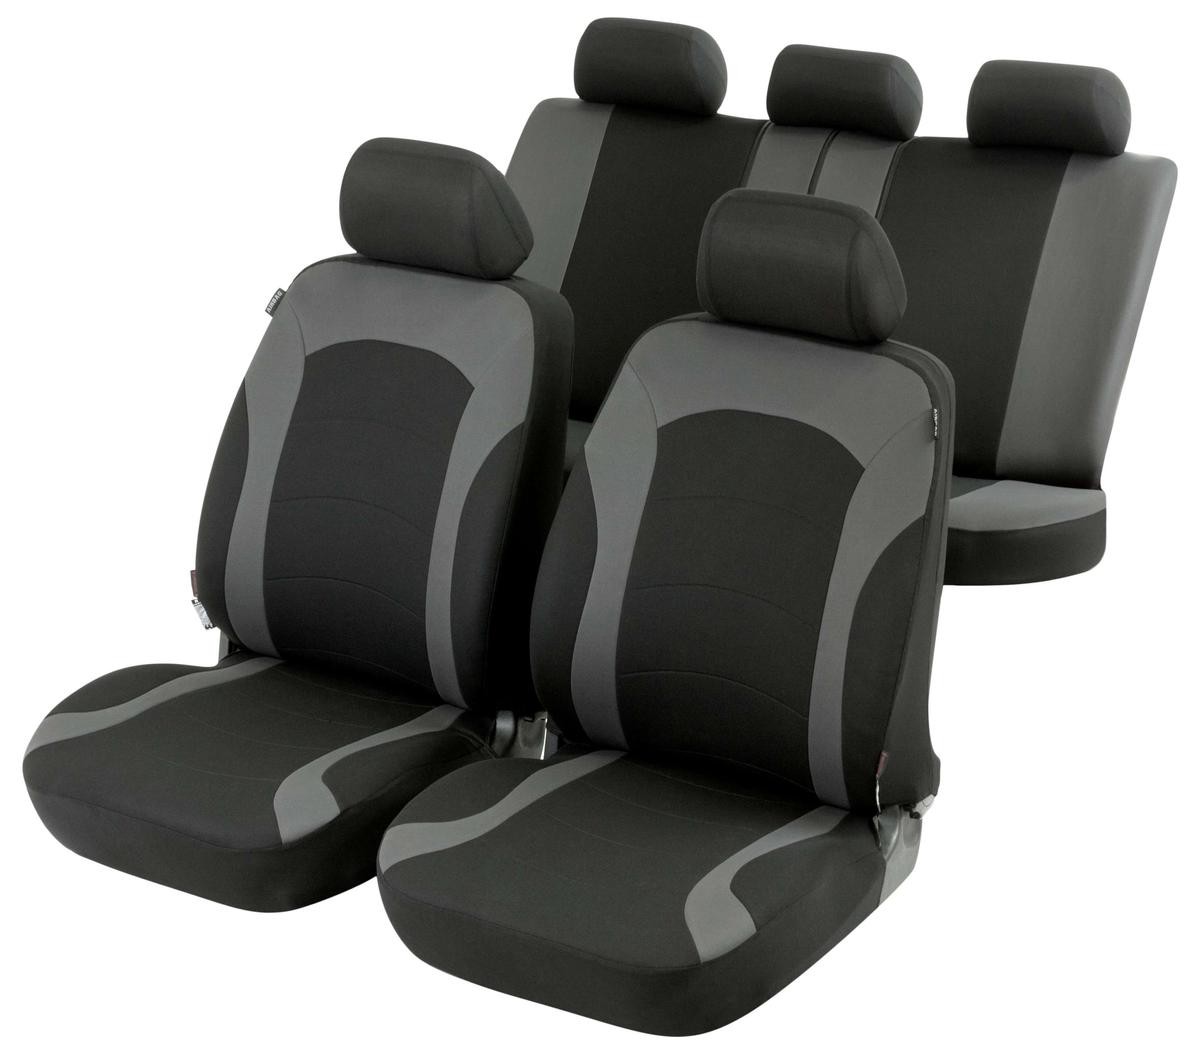 WALSER 11786 Auto seat covers VW PASSAT Variant (3B5) black/grey, Polyester, Front and Rear